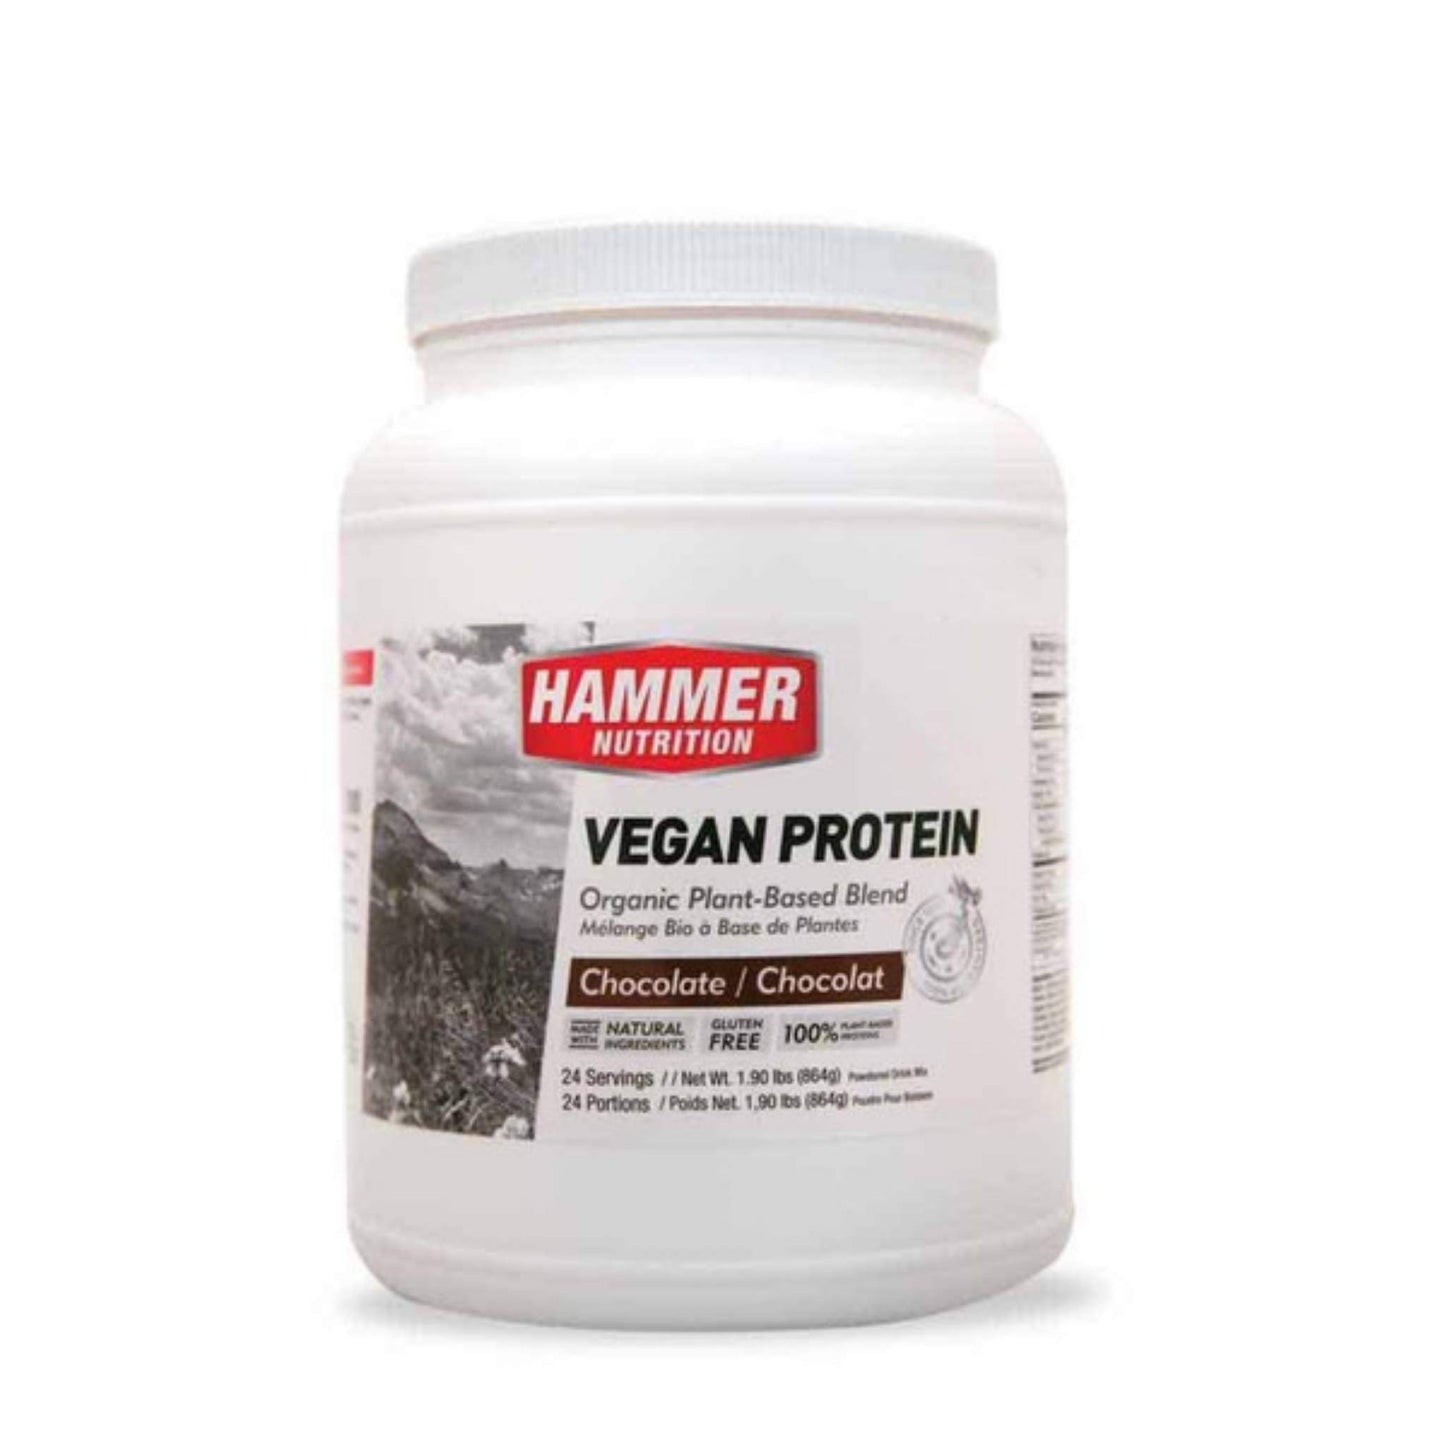 Hammer Nutrition - Vegan Protein, Chocolate, 24 Servings, Team Perfect